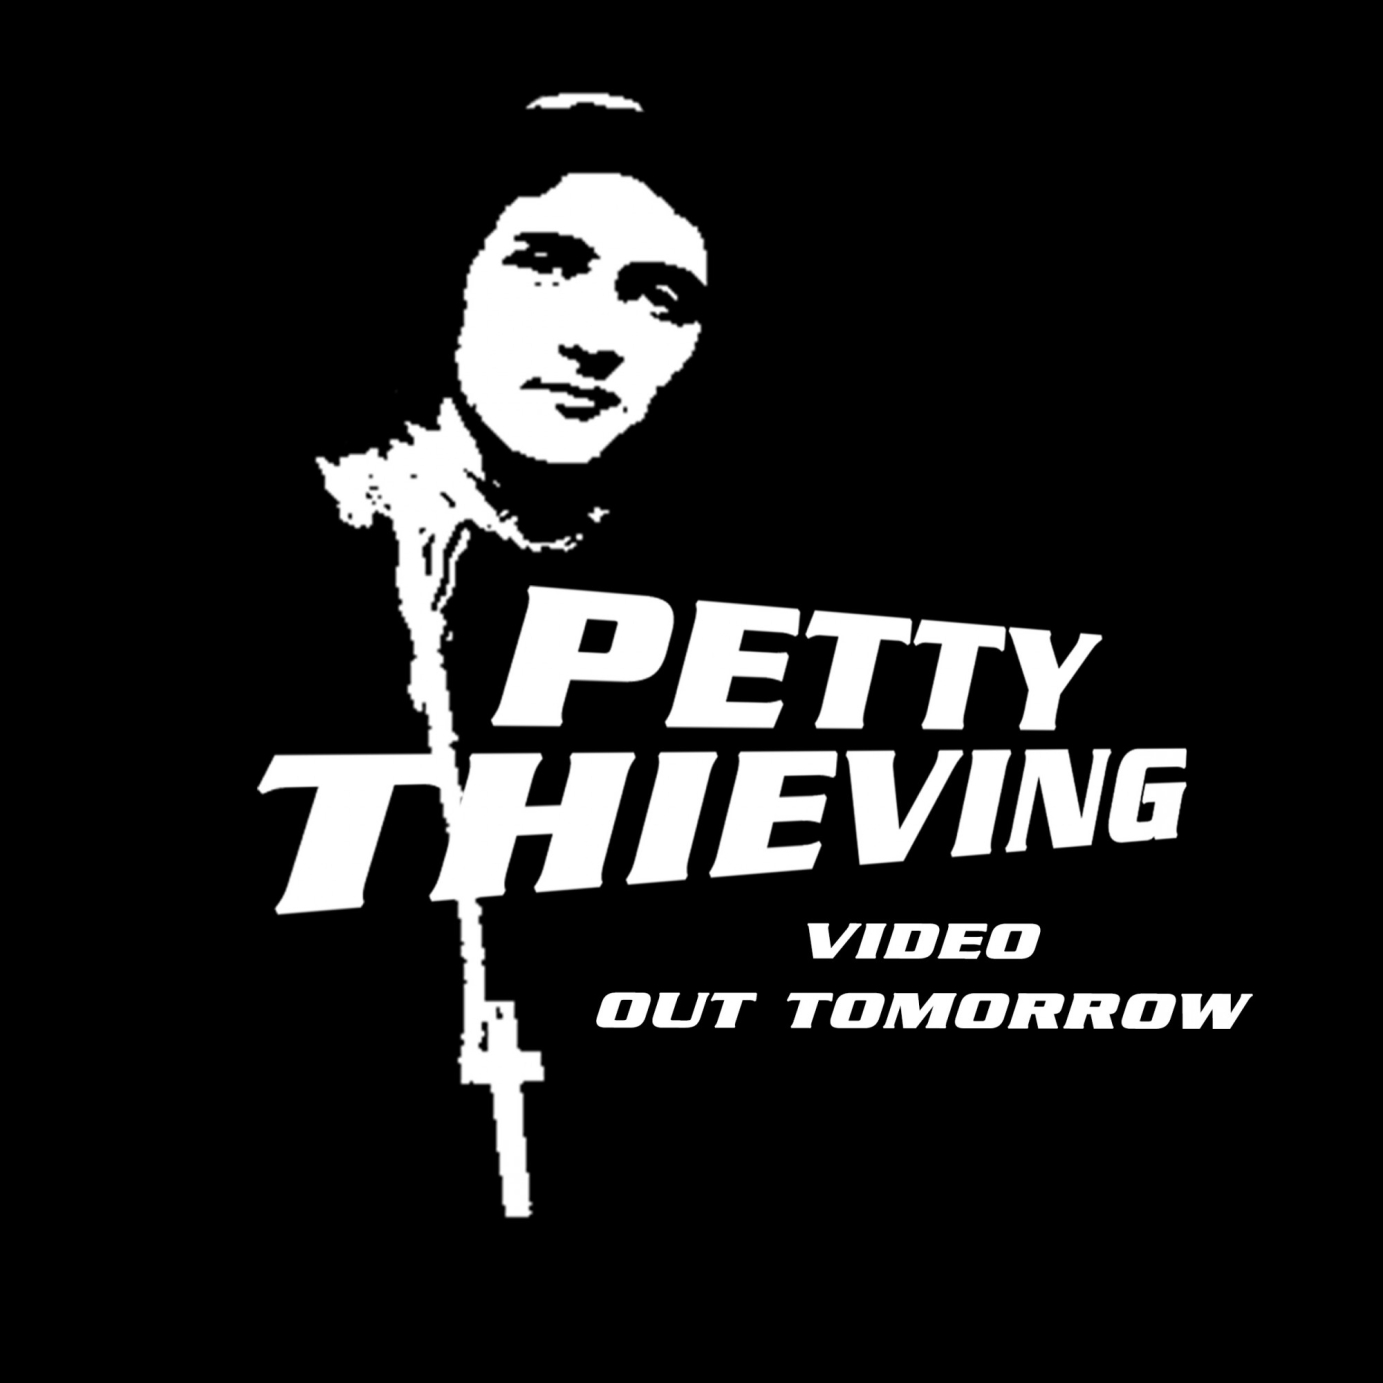 Petty Thieving Cover Art and Art Direction